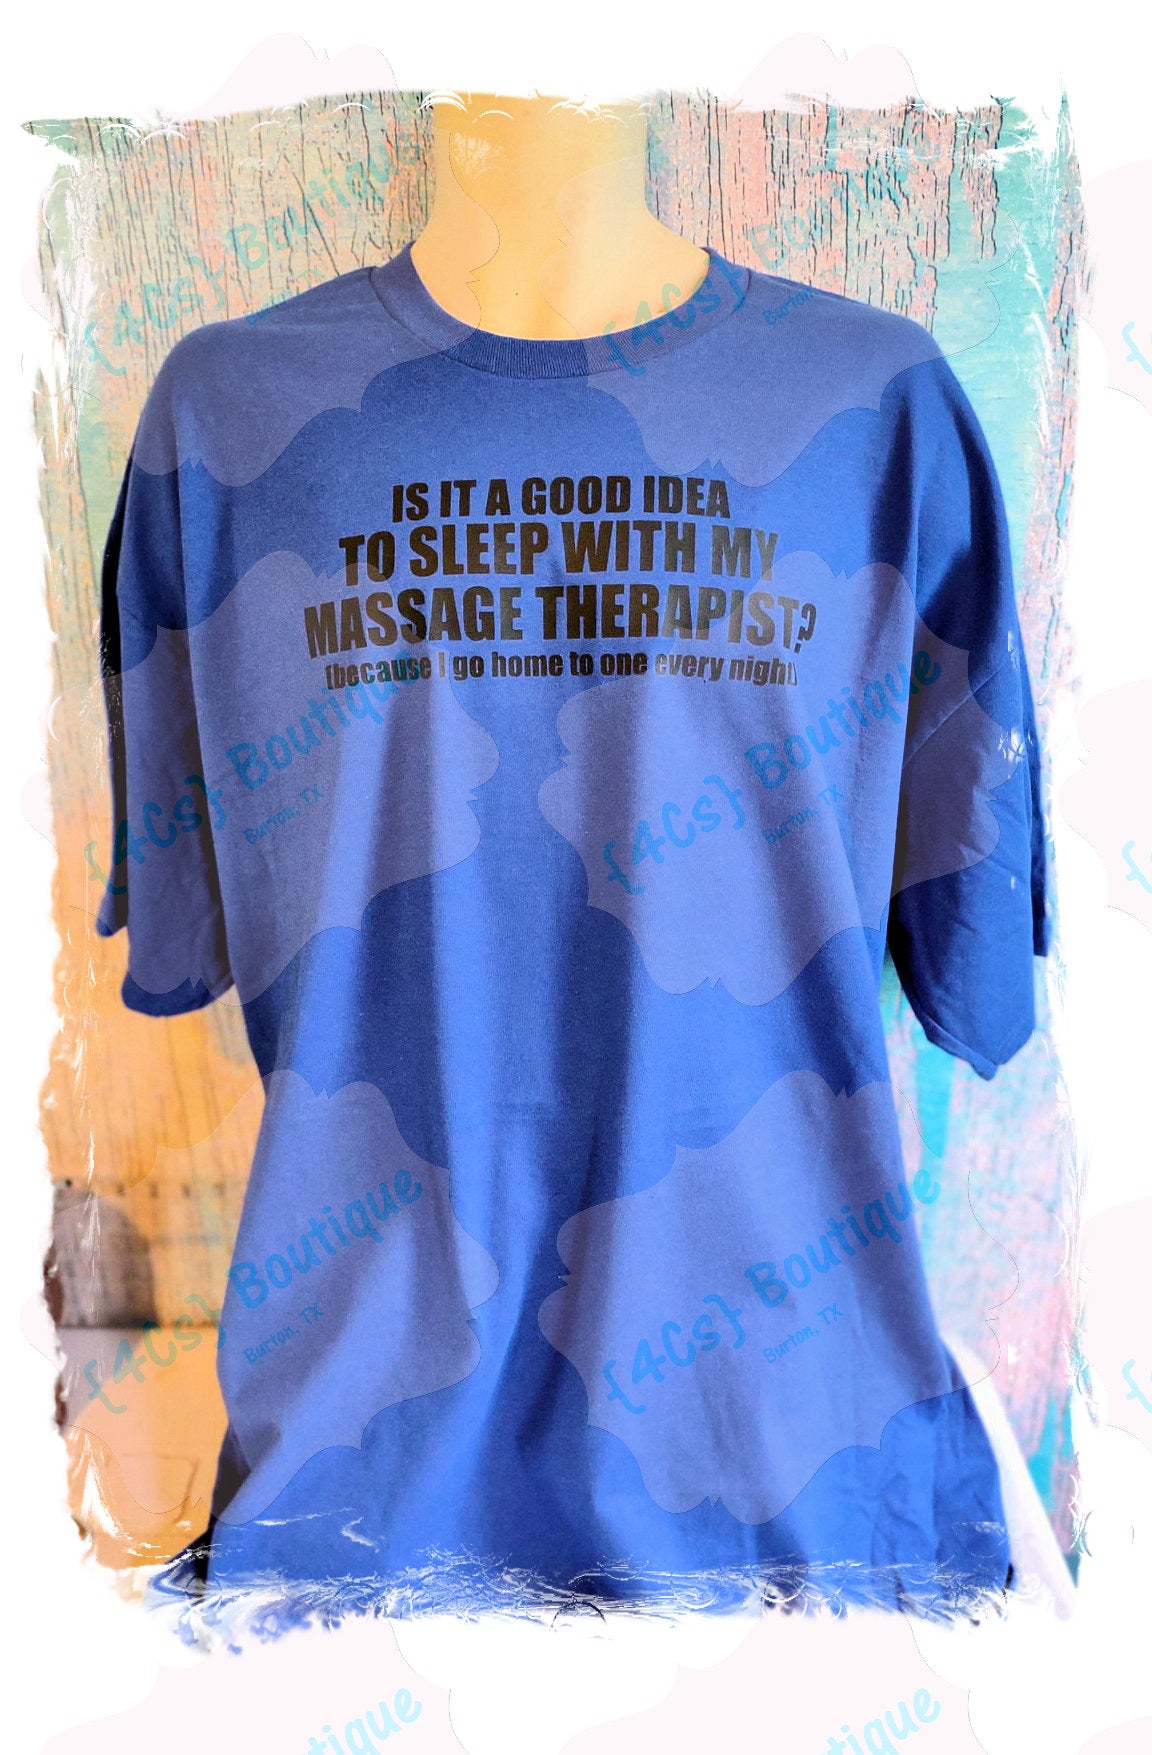 Is It A Good Idea To Sleep With Your Message Therapist? Shirt | 4Cs Boutique